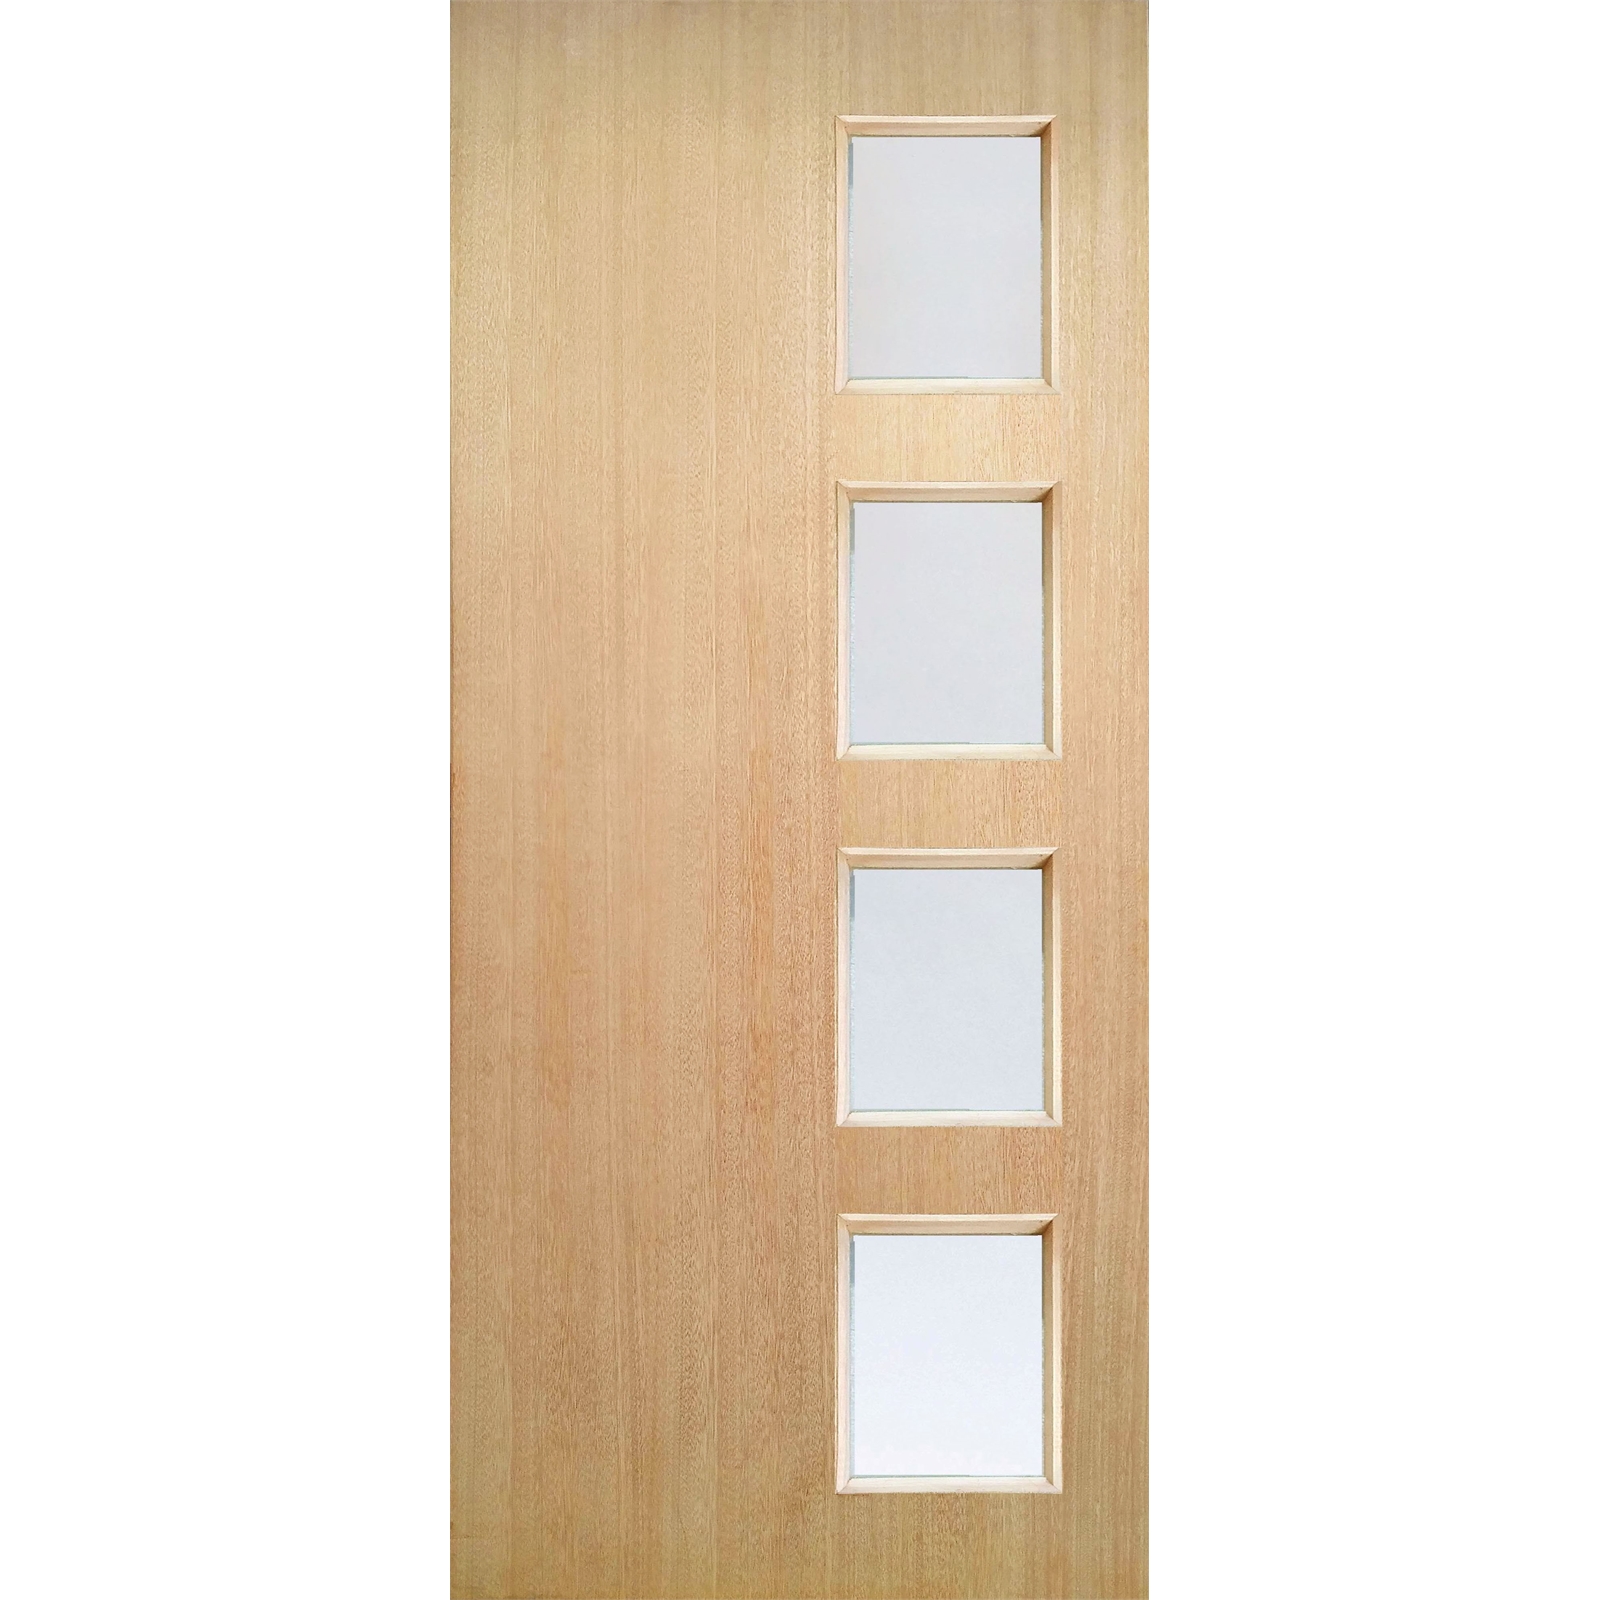 Woodcraft Doors 2040 x 820 x 40mm St Clair SD04 Entrance Door With Frosted Safety Glass